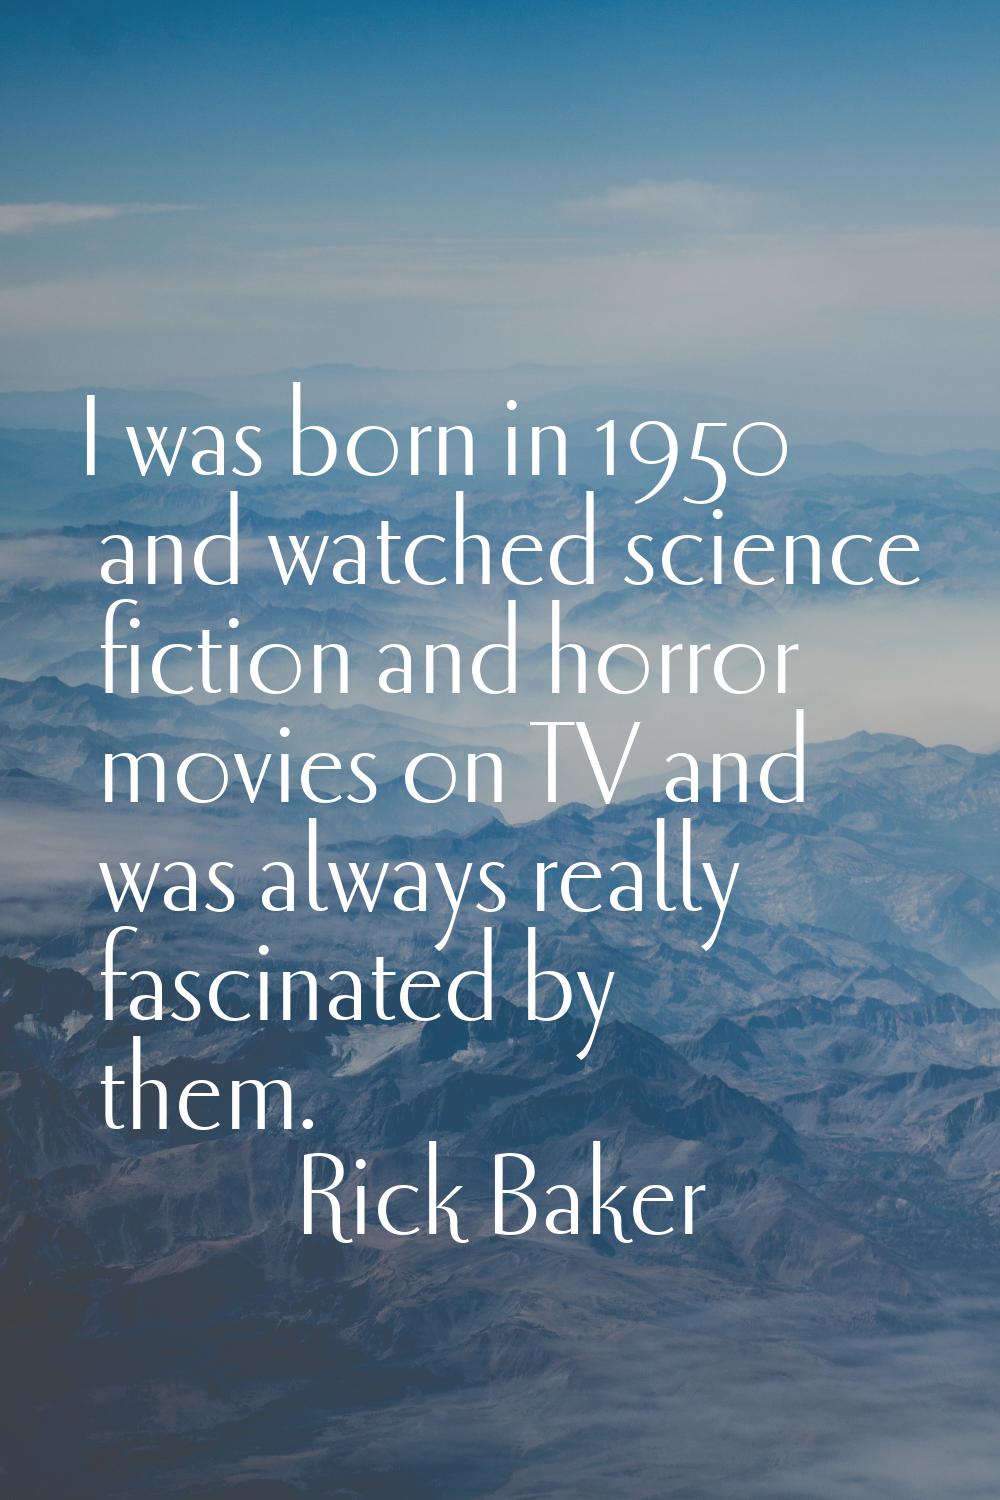 I was born in 1950 and watched science fiction and horror movies on TV and was always really fascin